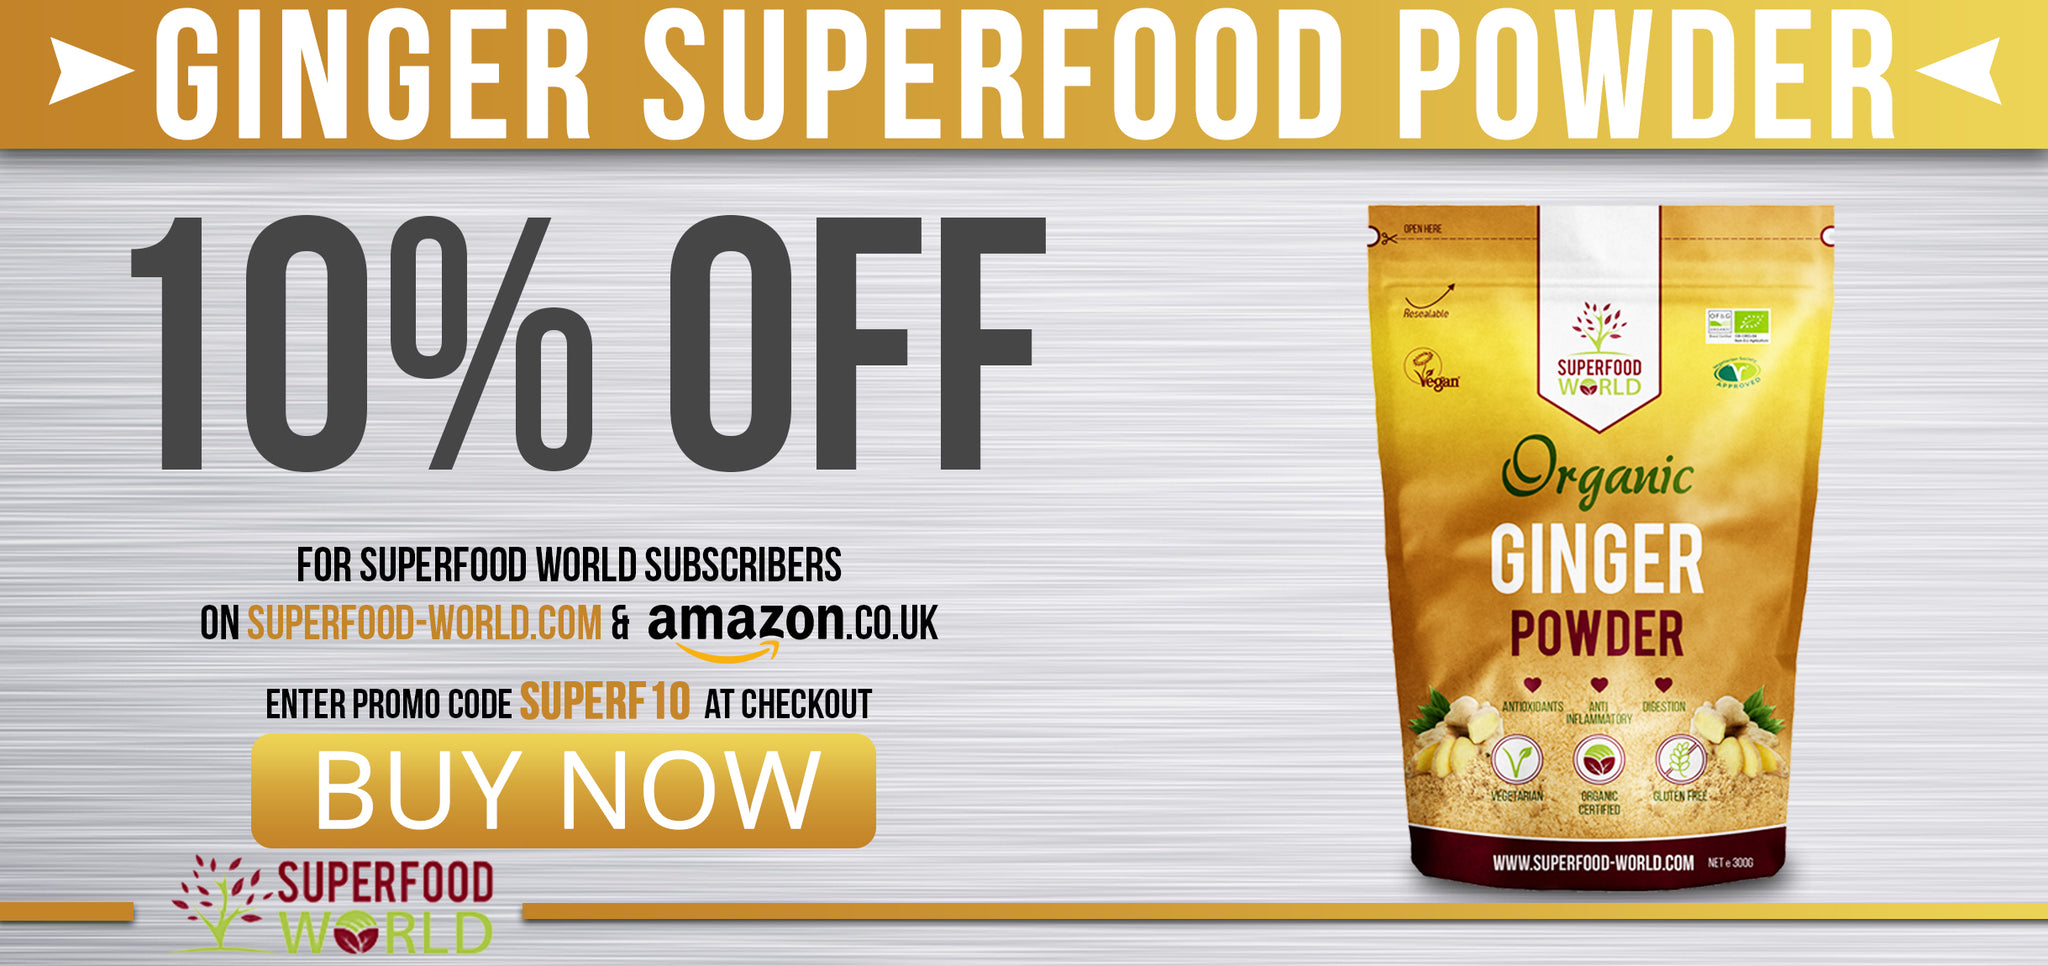 Buy Ginger Powder from Superfood World Today!